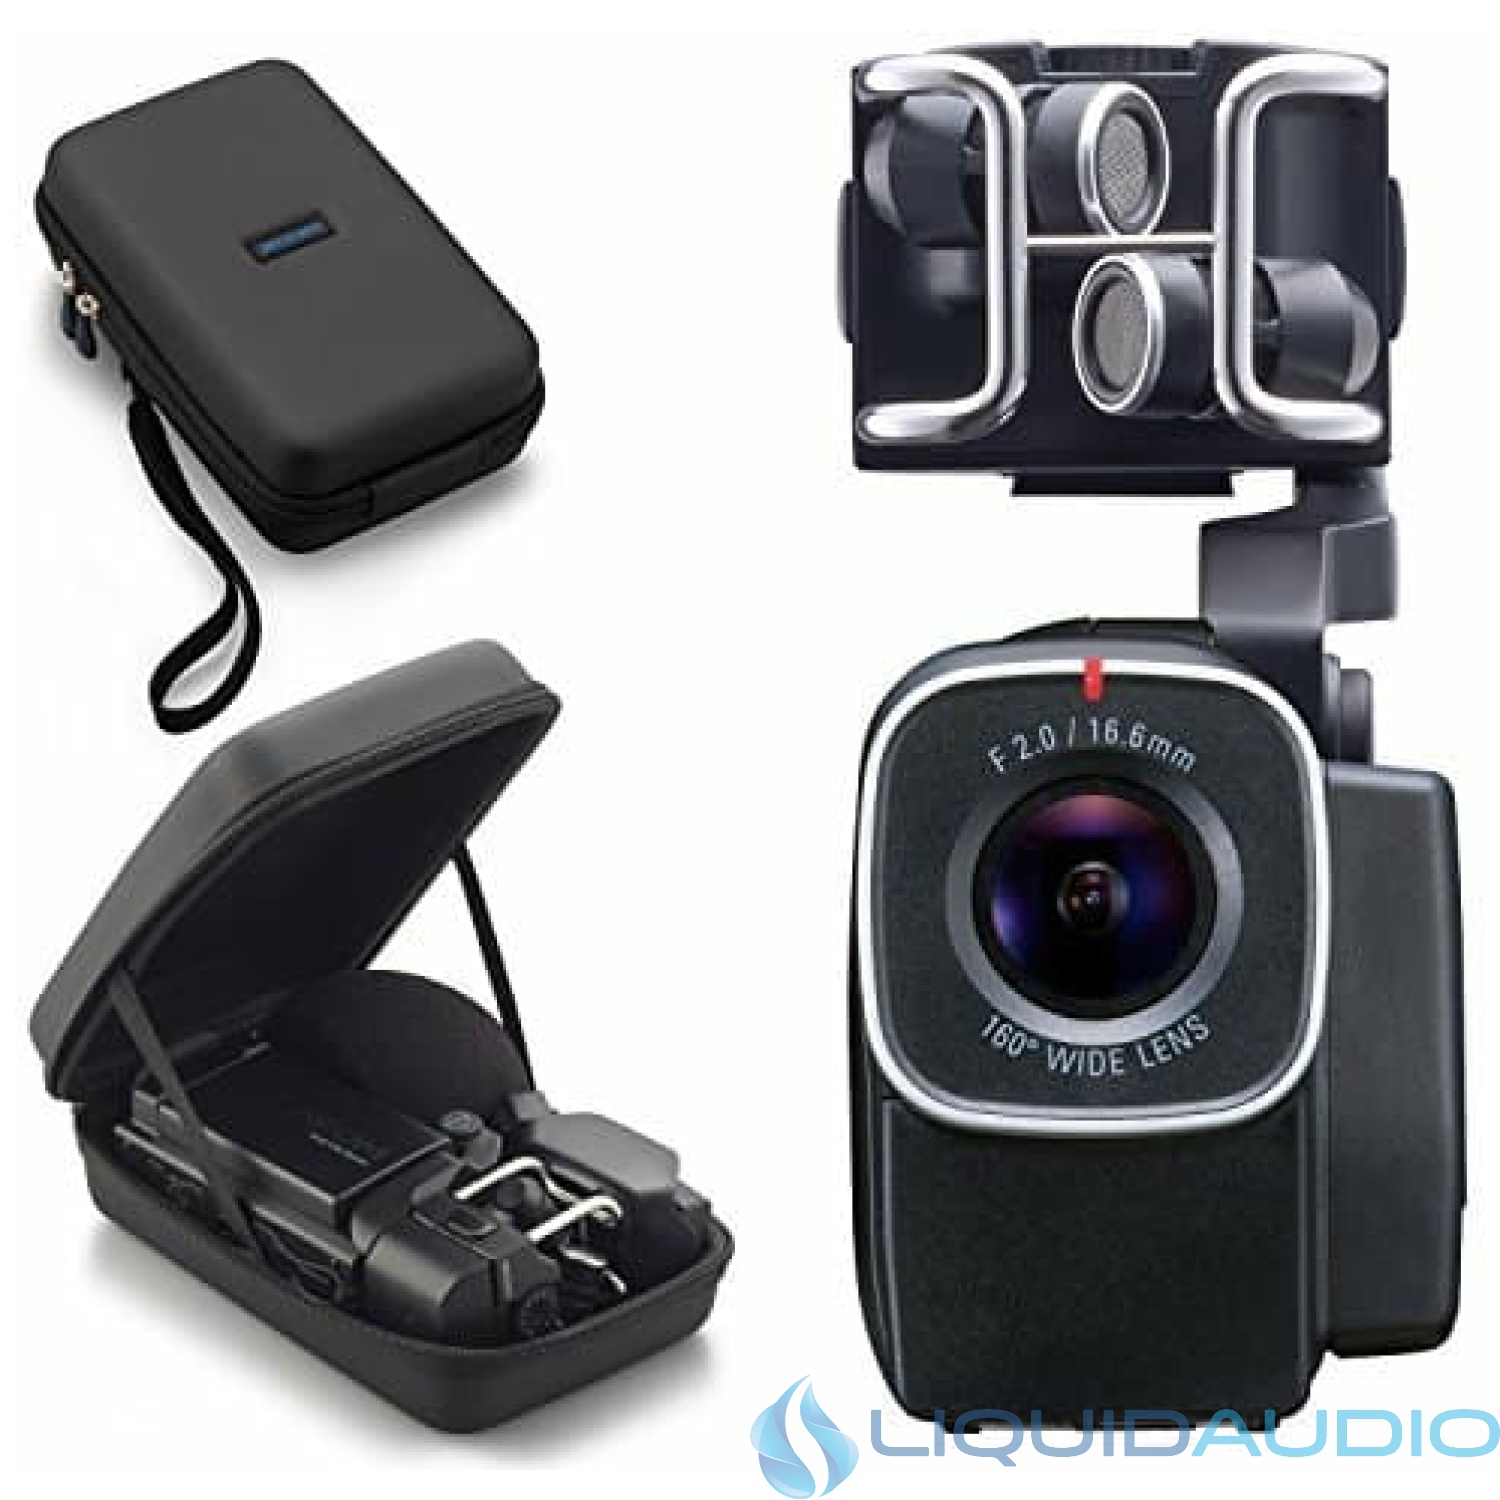 Zoom Q8 Handy Video Recorder with Zoom SCQ-8 Carrying Case